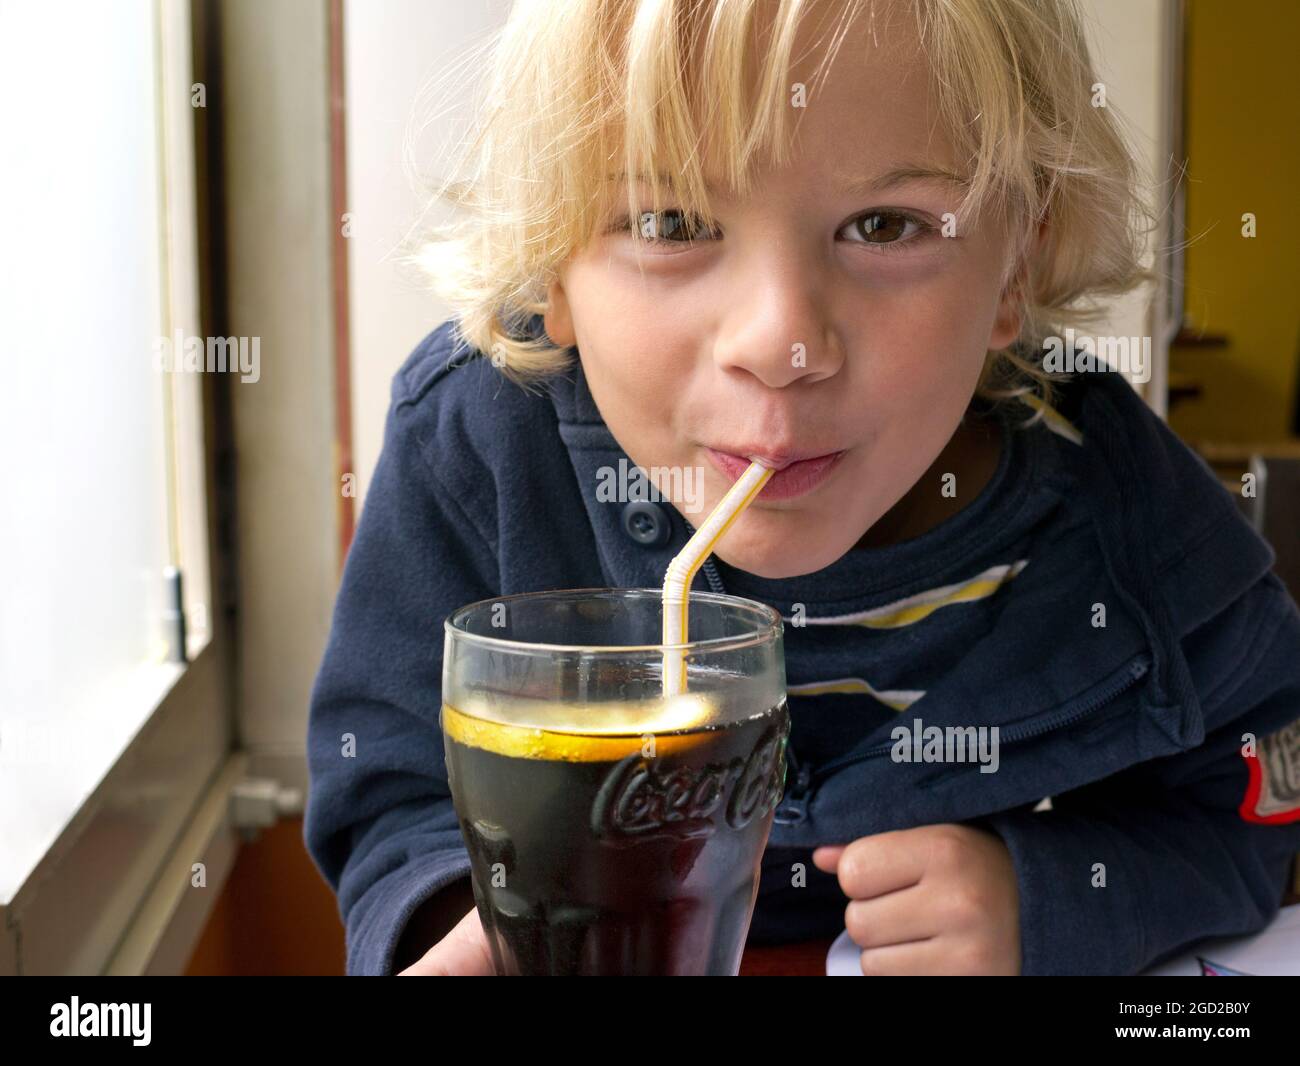 Boy 6-8 years infant child blond happy impish cheeky drinking through a straw a branded glass of Coca Cola 'COKE' with a slice of lemon added. Stock Photo